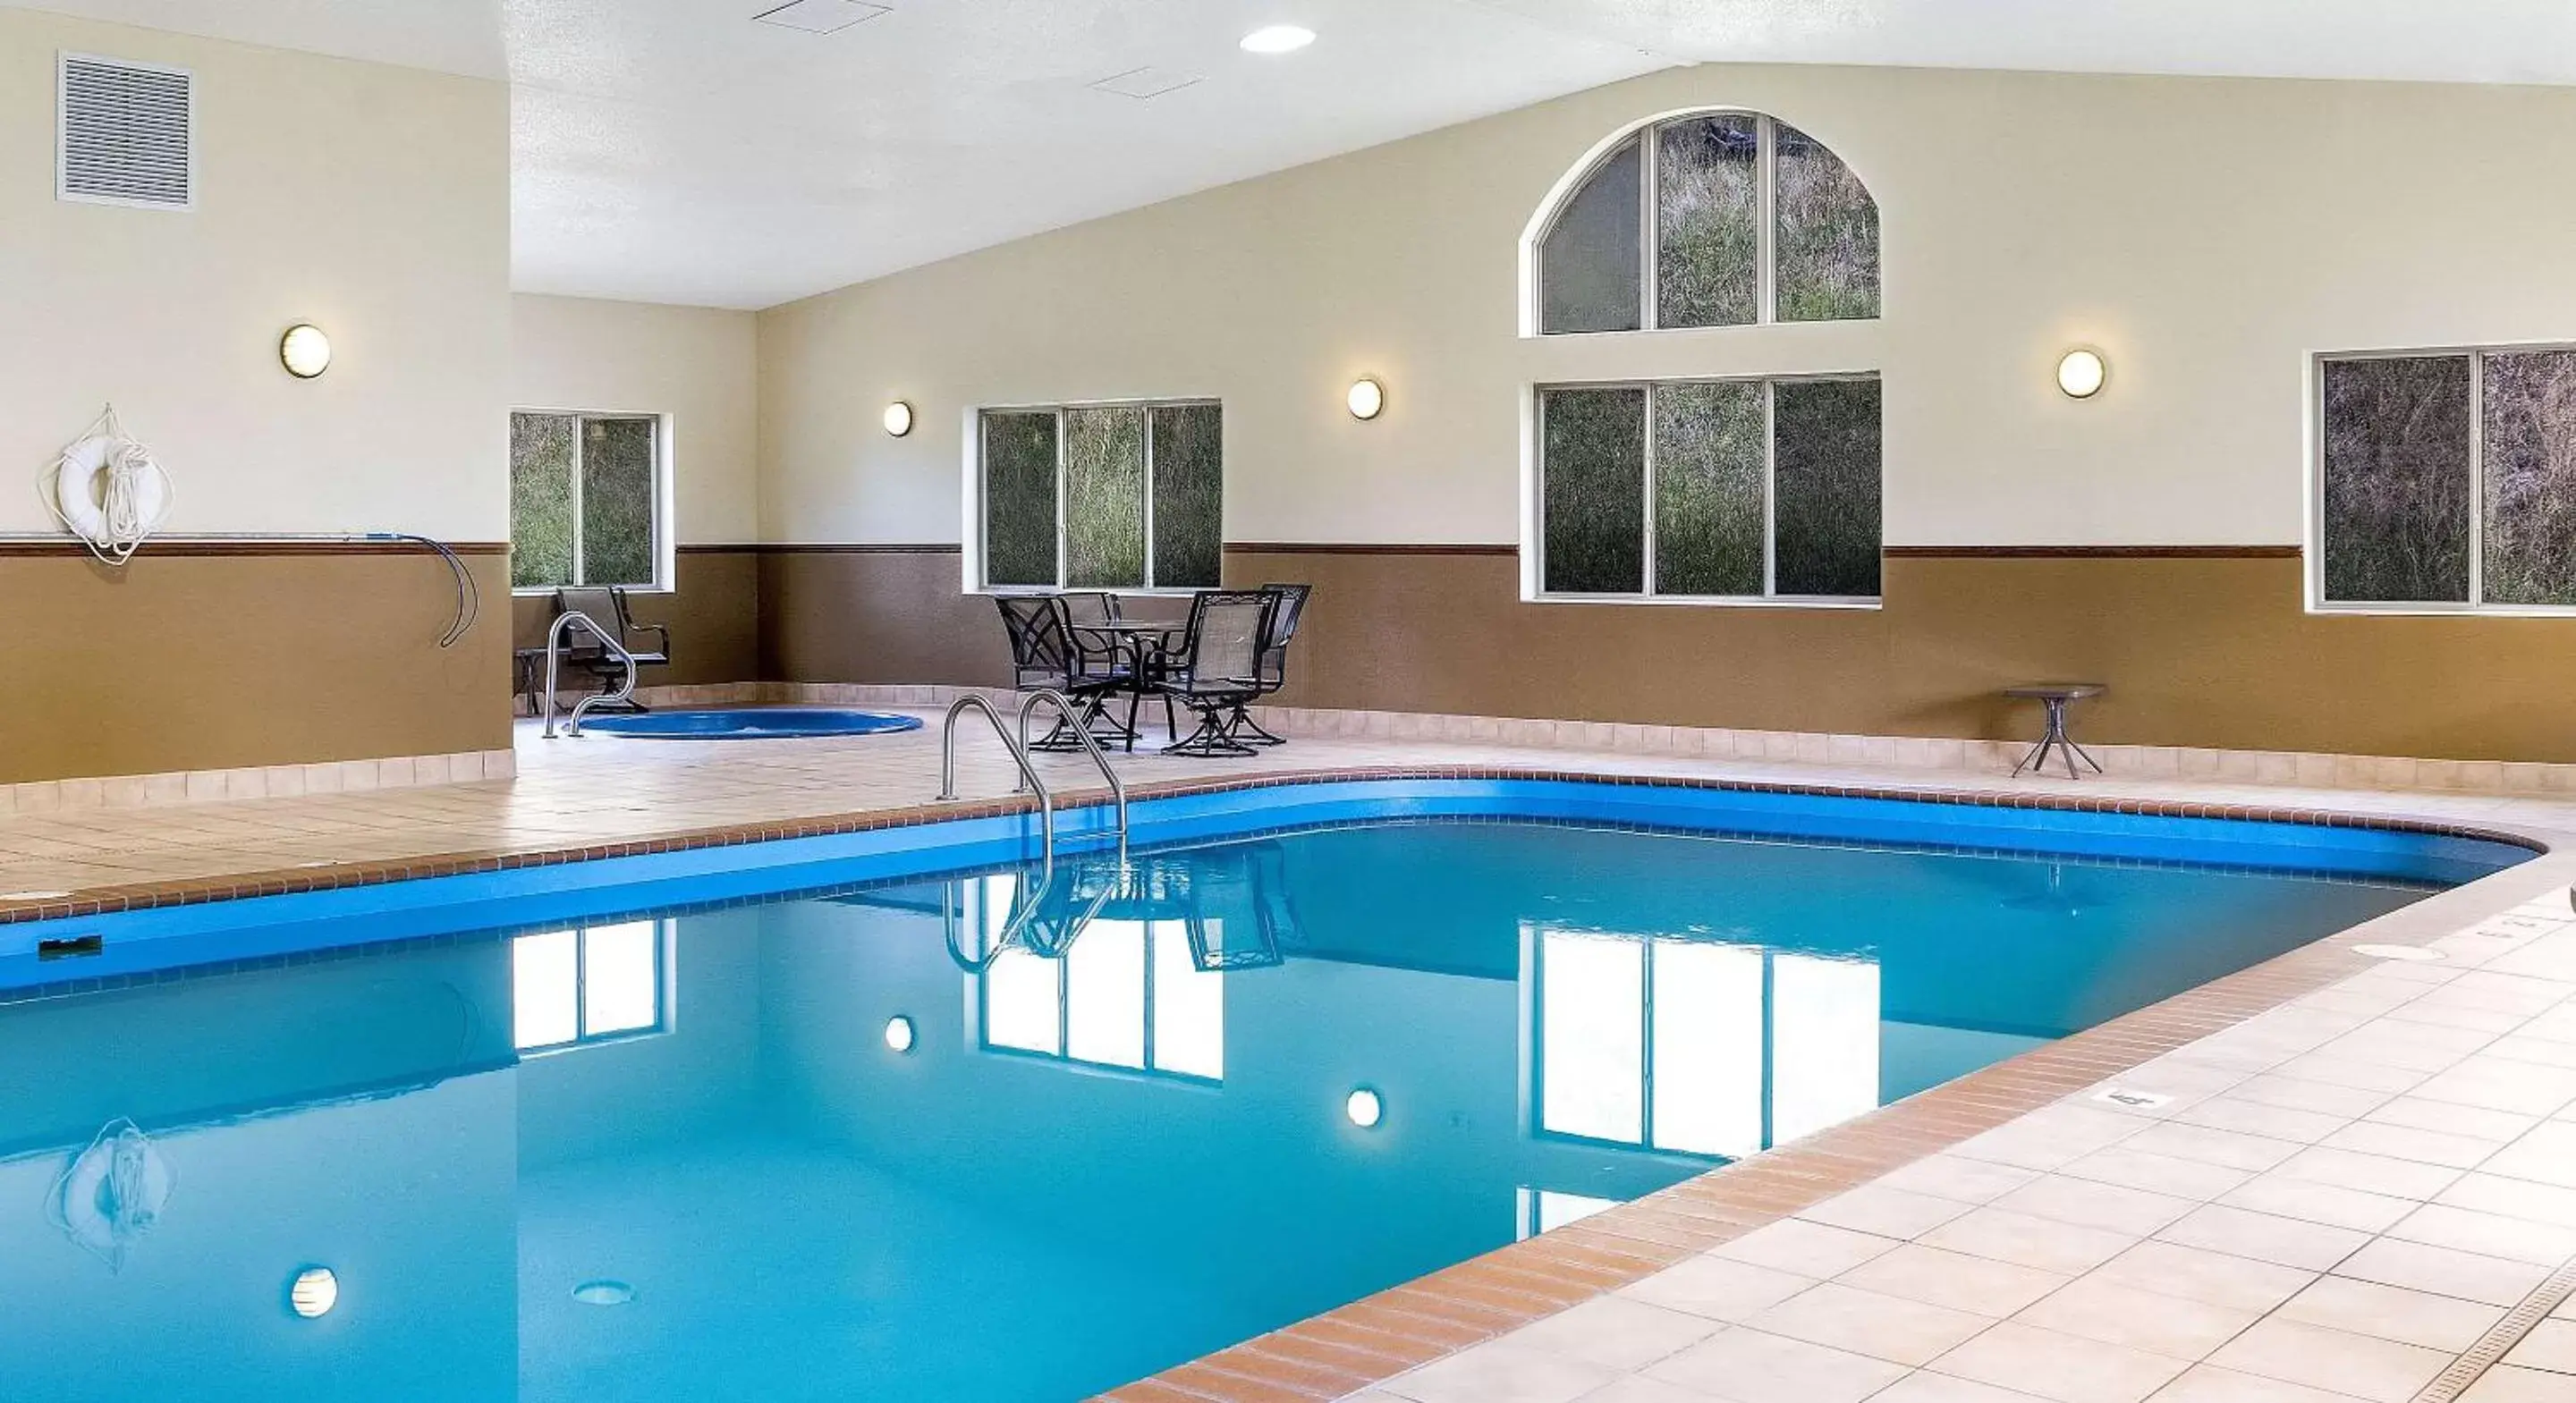 On site, Swimming Pool in Comfort Inn & Suites Near Custer State Park and Mt Rushmore